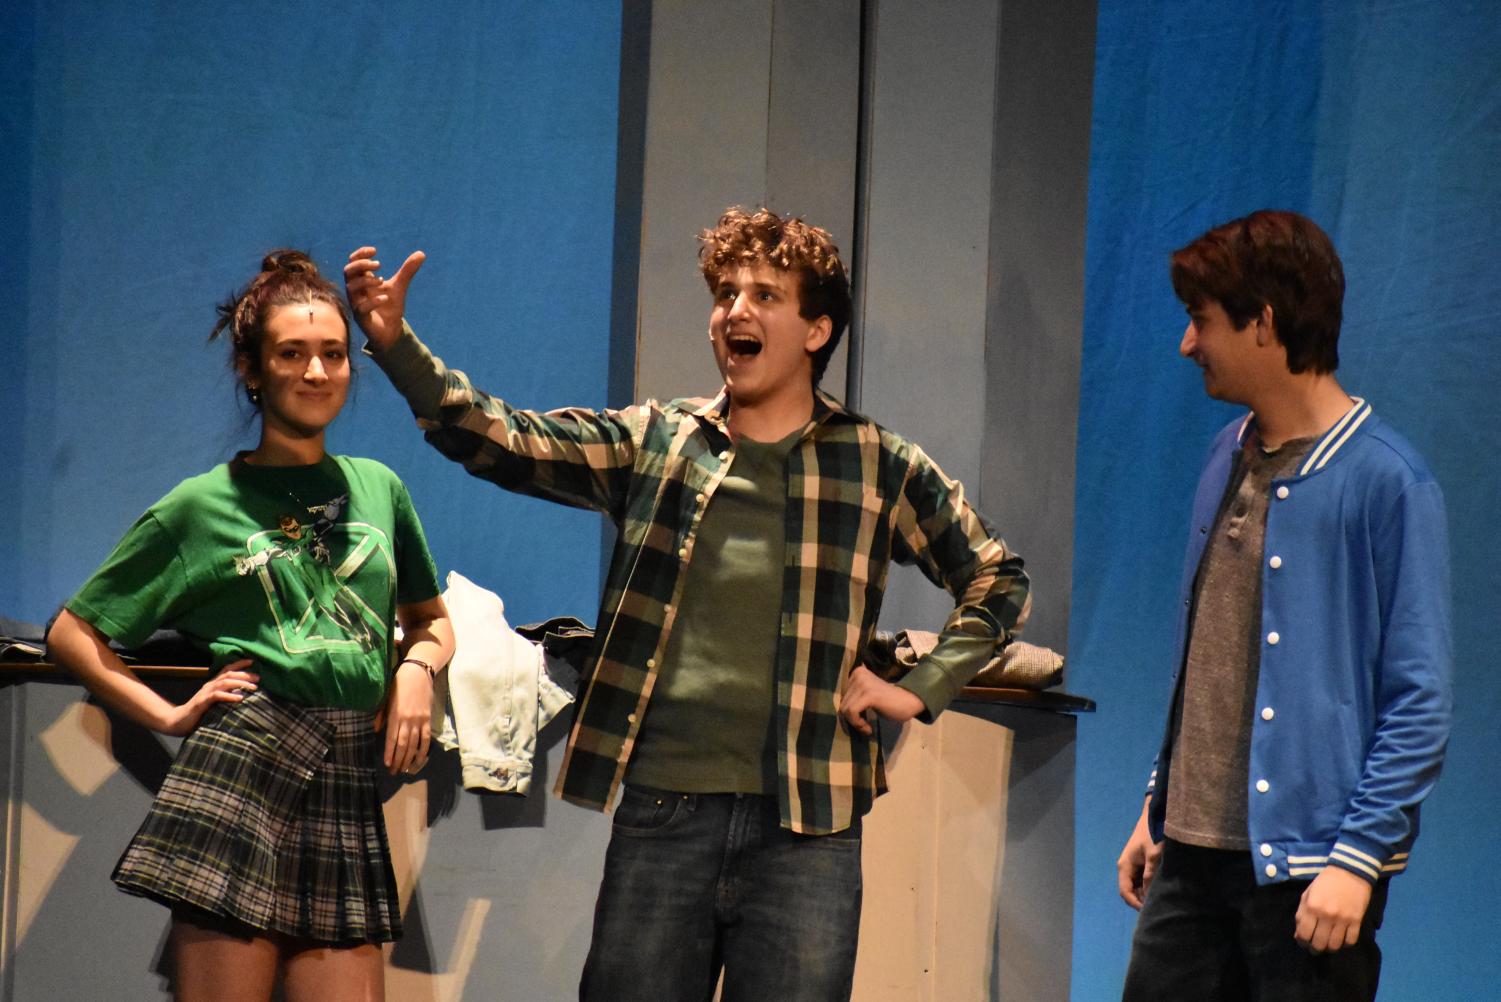 Scarsdale+High+School+Drama+Clubs+She+Kills+Monsters+Shines+on+Stage